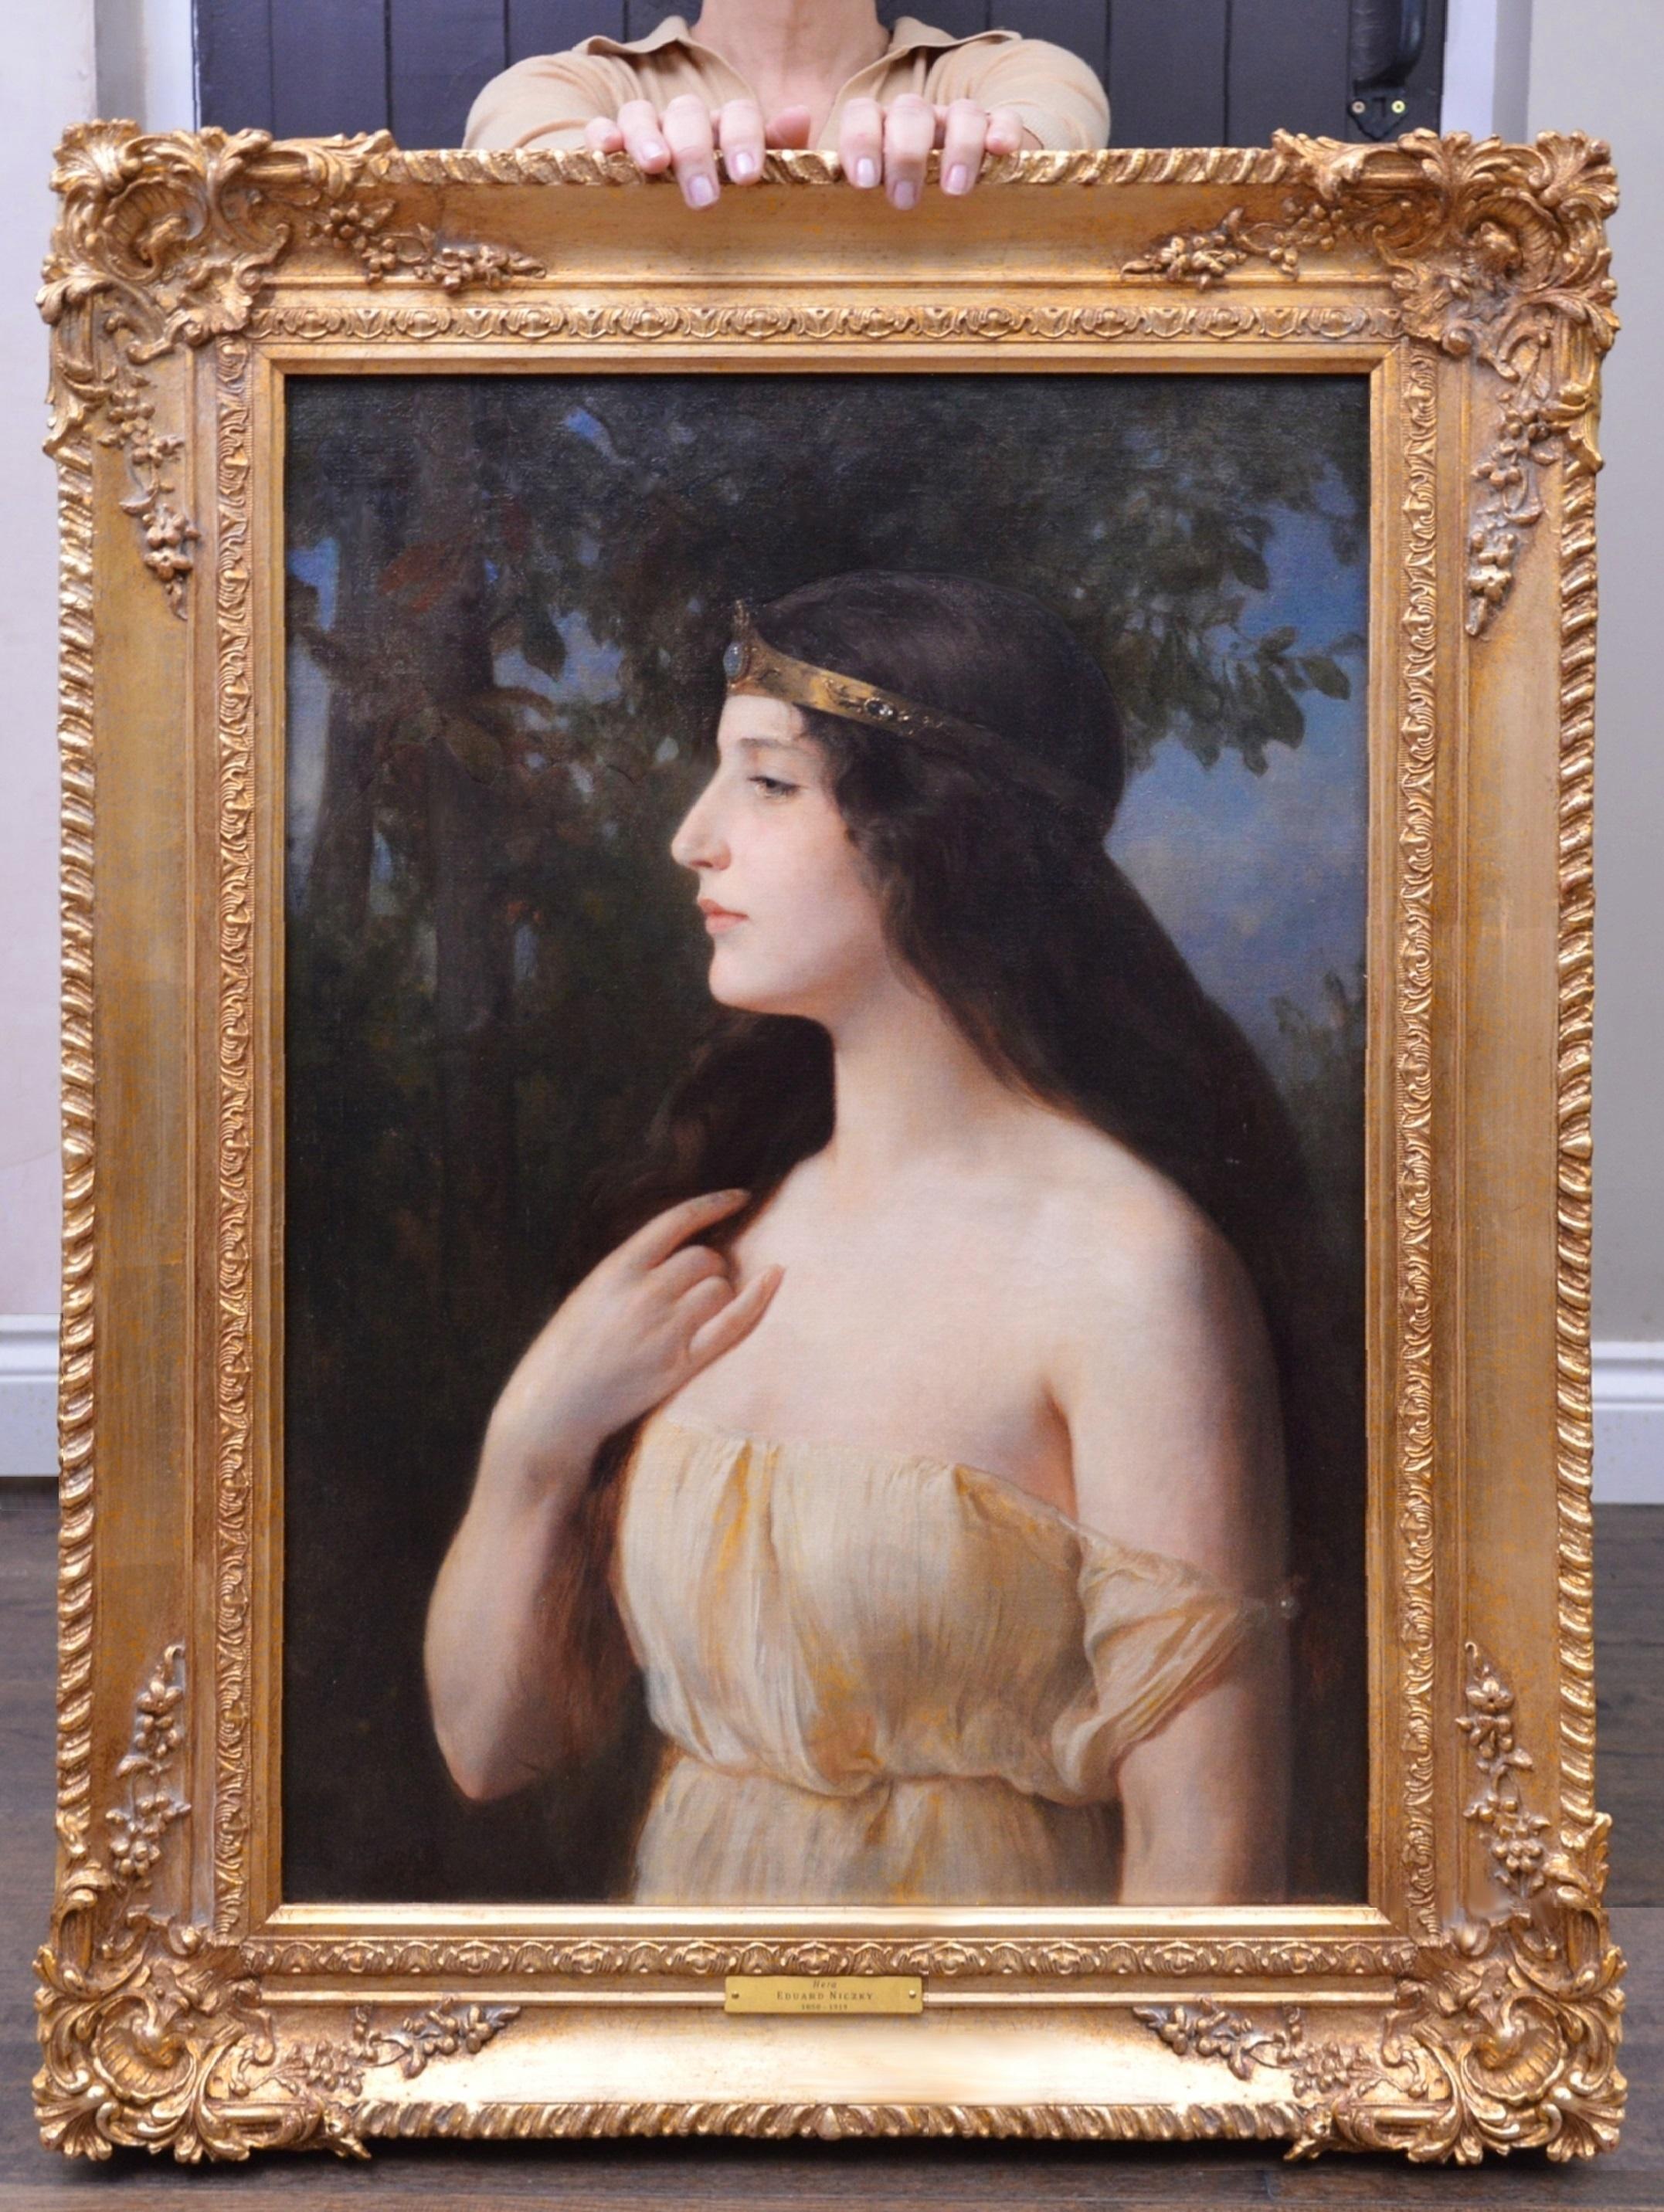 Eduard Niczky Portrait Painting - Hera - Large 19th Century Neoclassical Oil Painting of Ancient Greece Goddess 